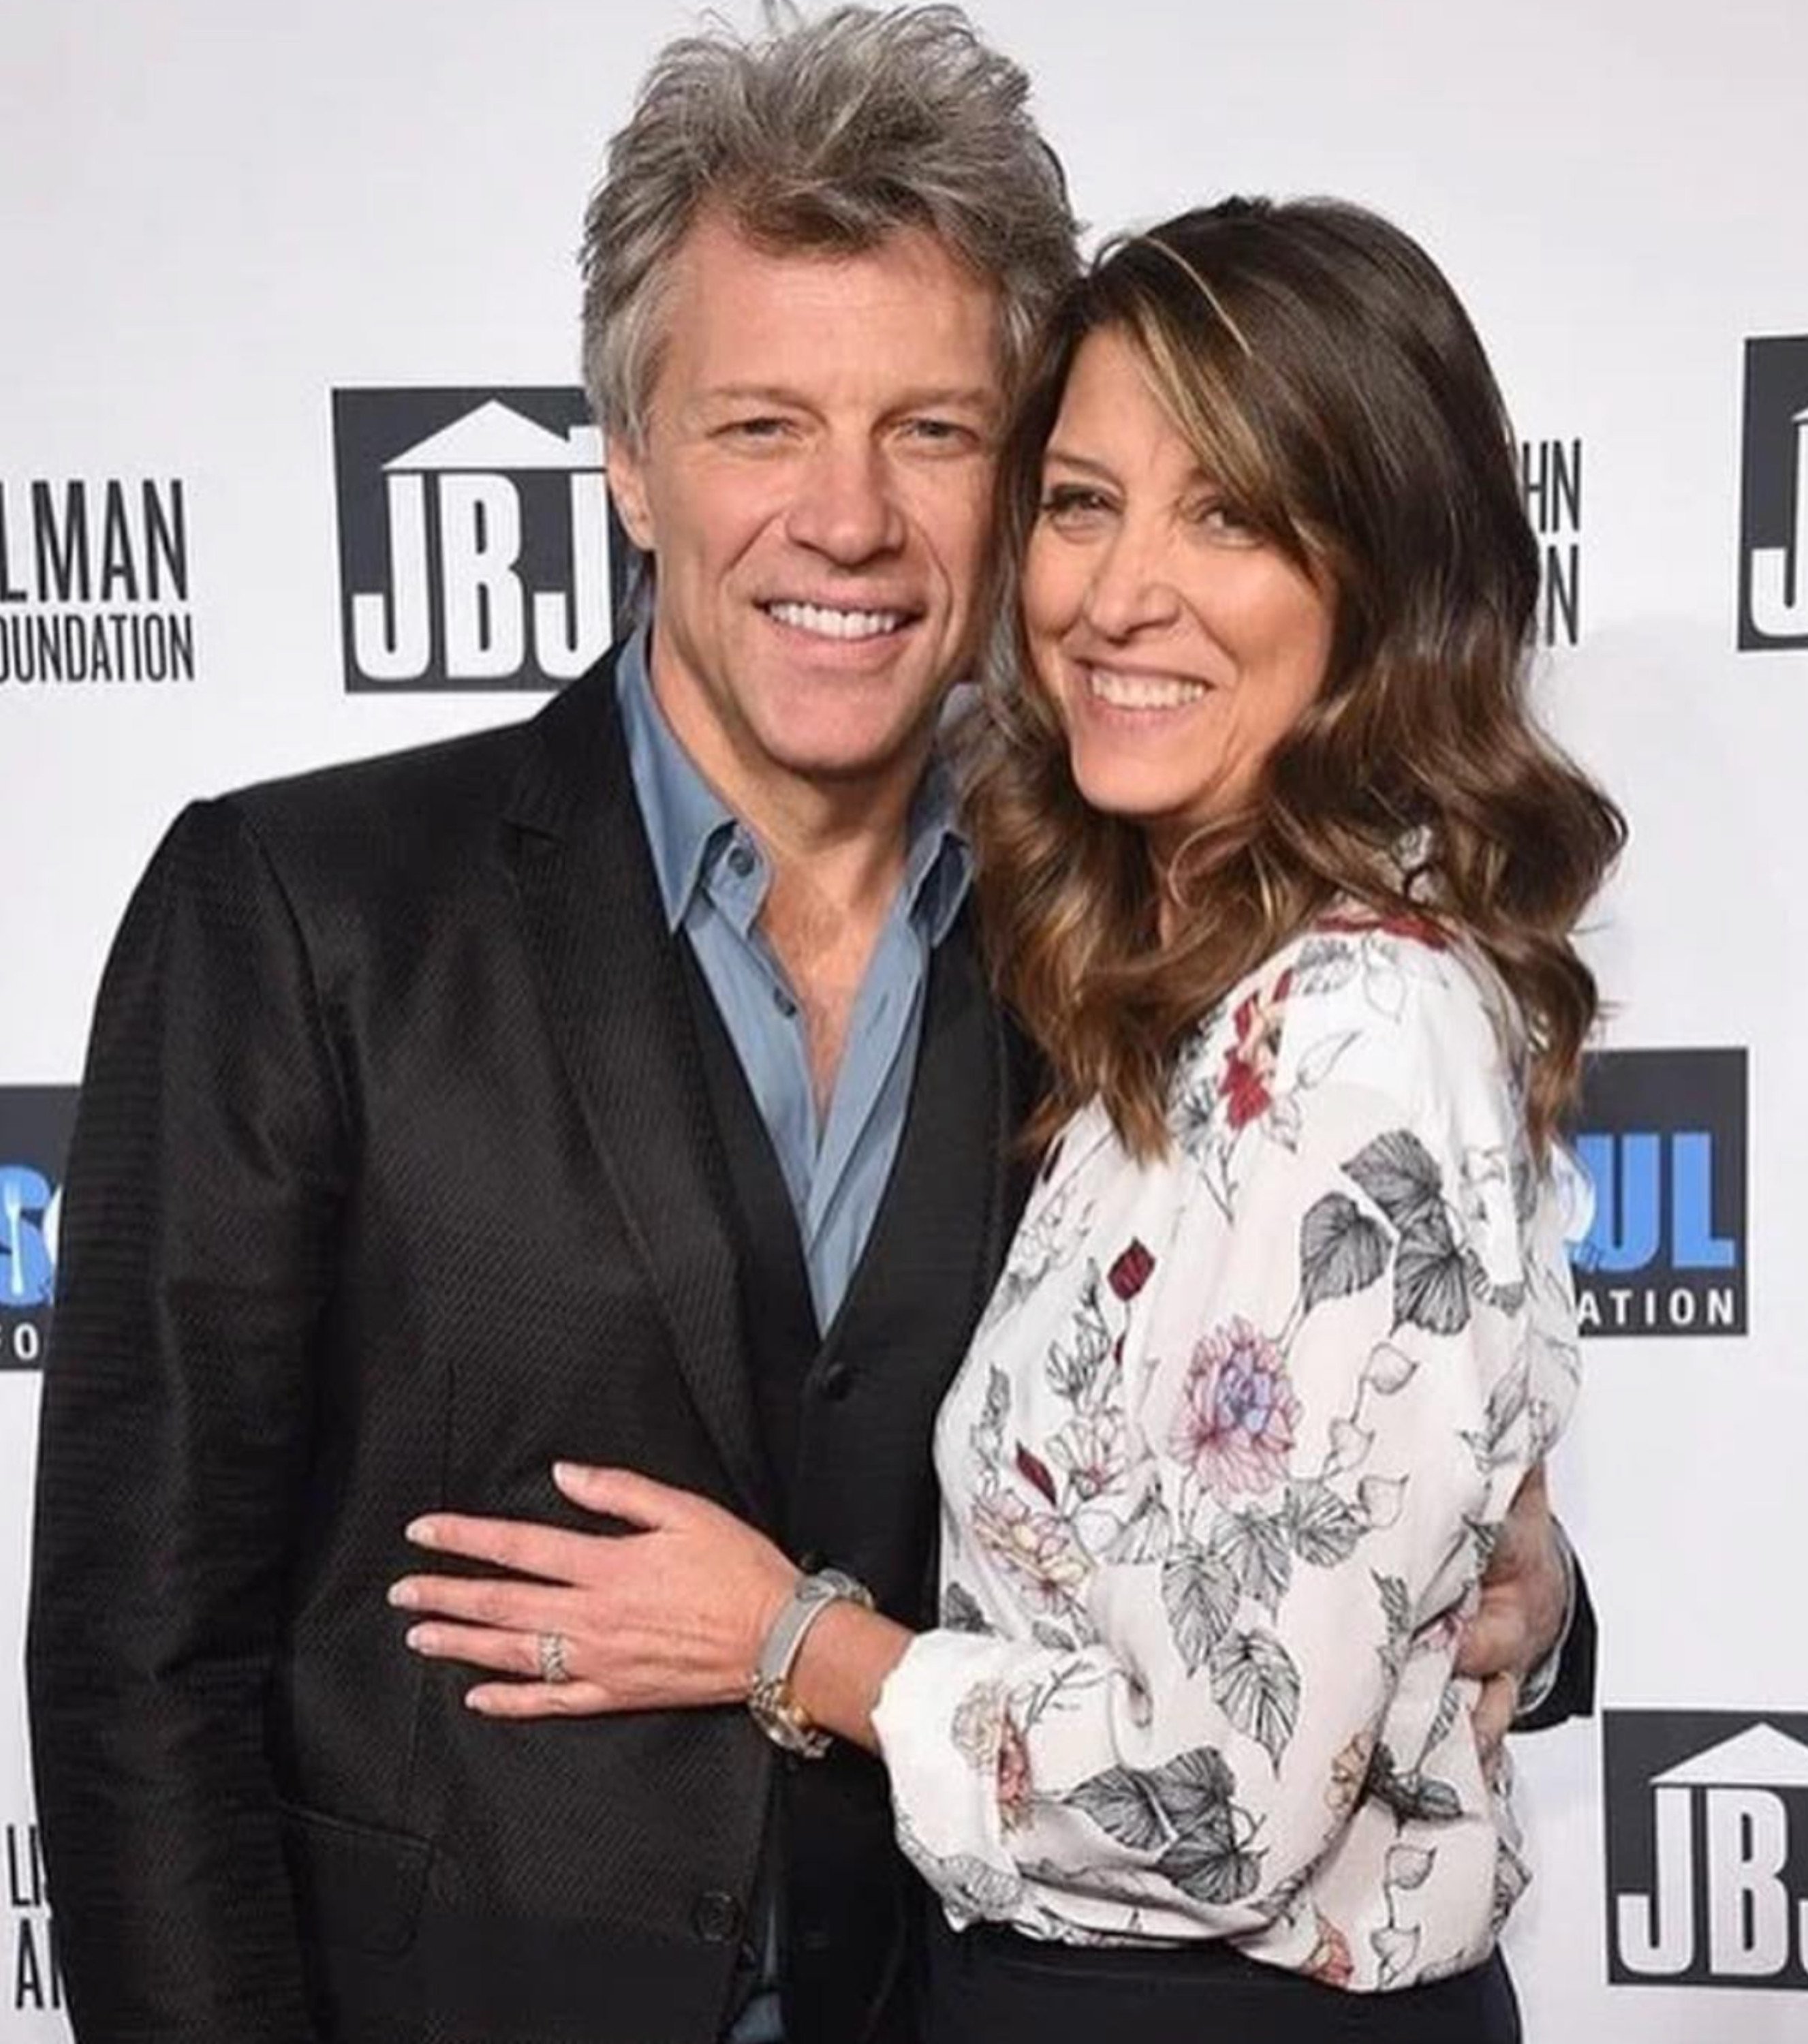 Grammy-winning musician Jon Bon Jovi married his high school sweetheart Dorothea Hurley in 1989, and they share four kids together. Photo: @j_bonjovi/Instagram